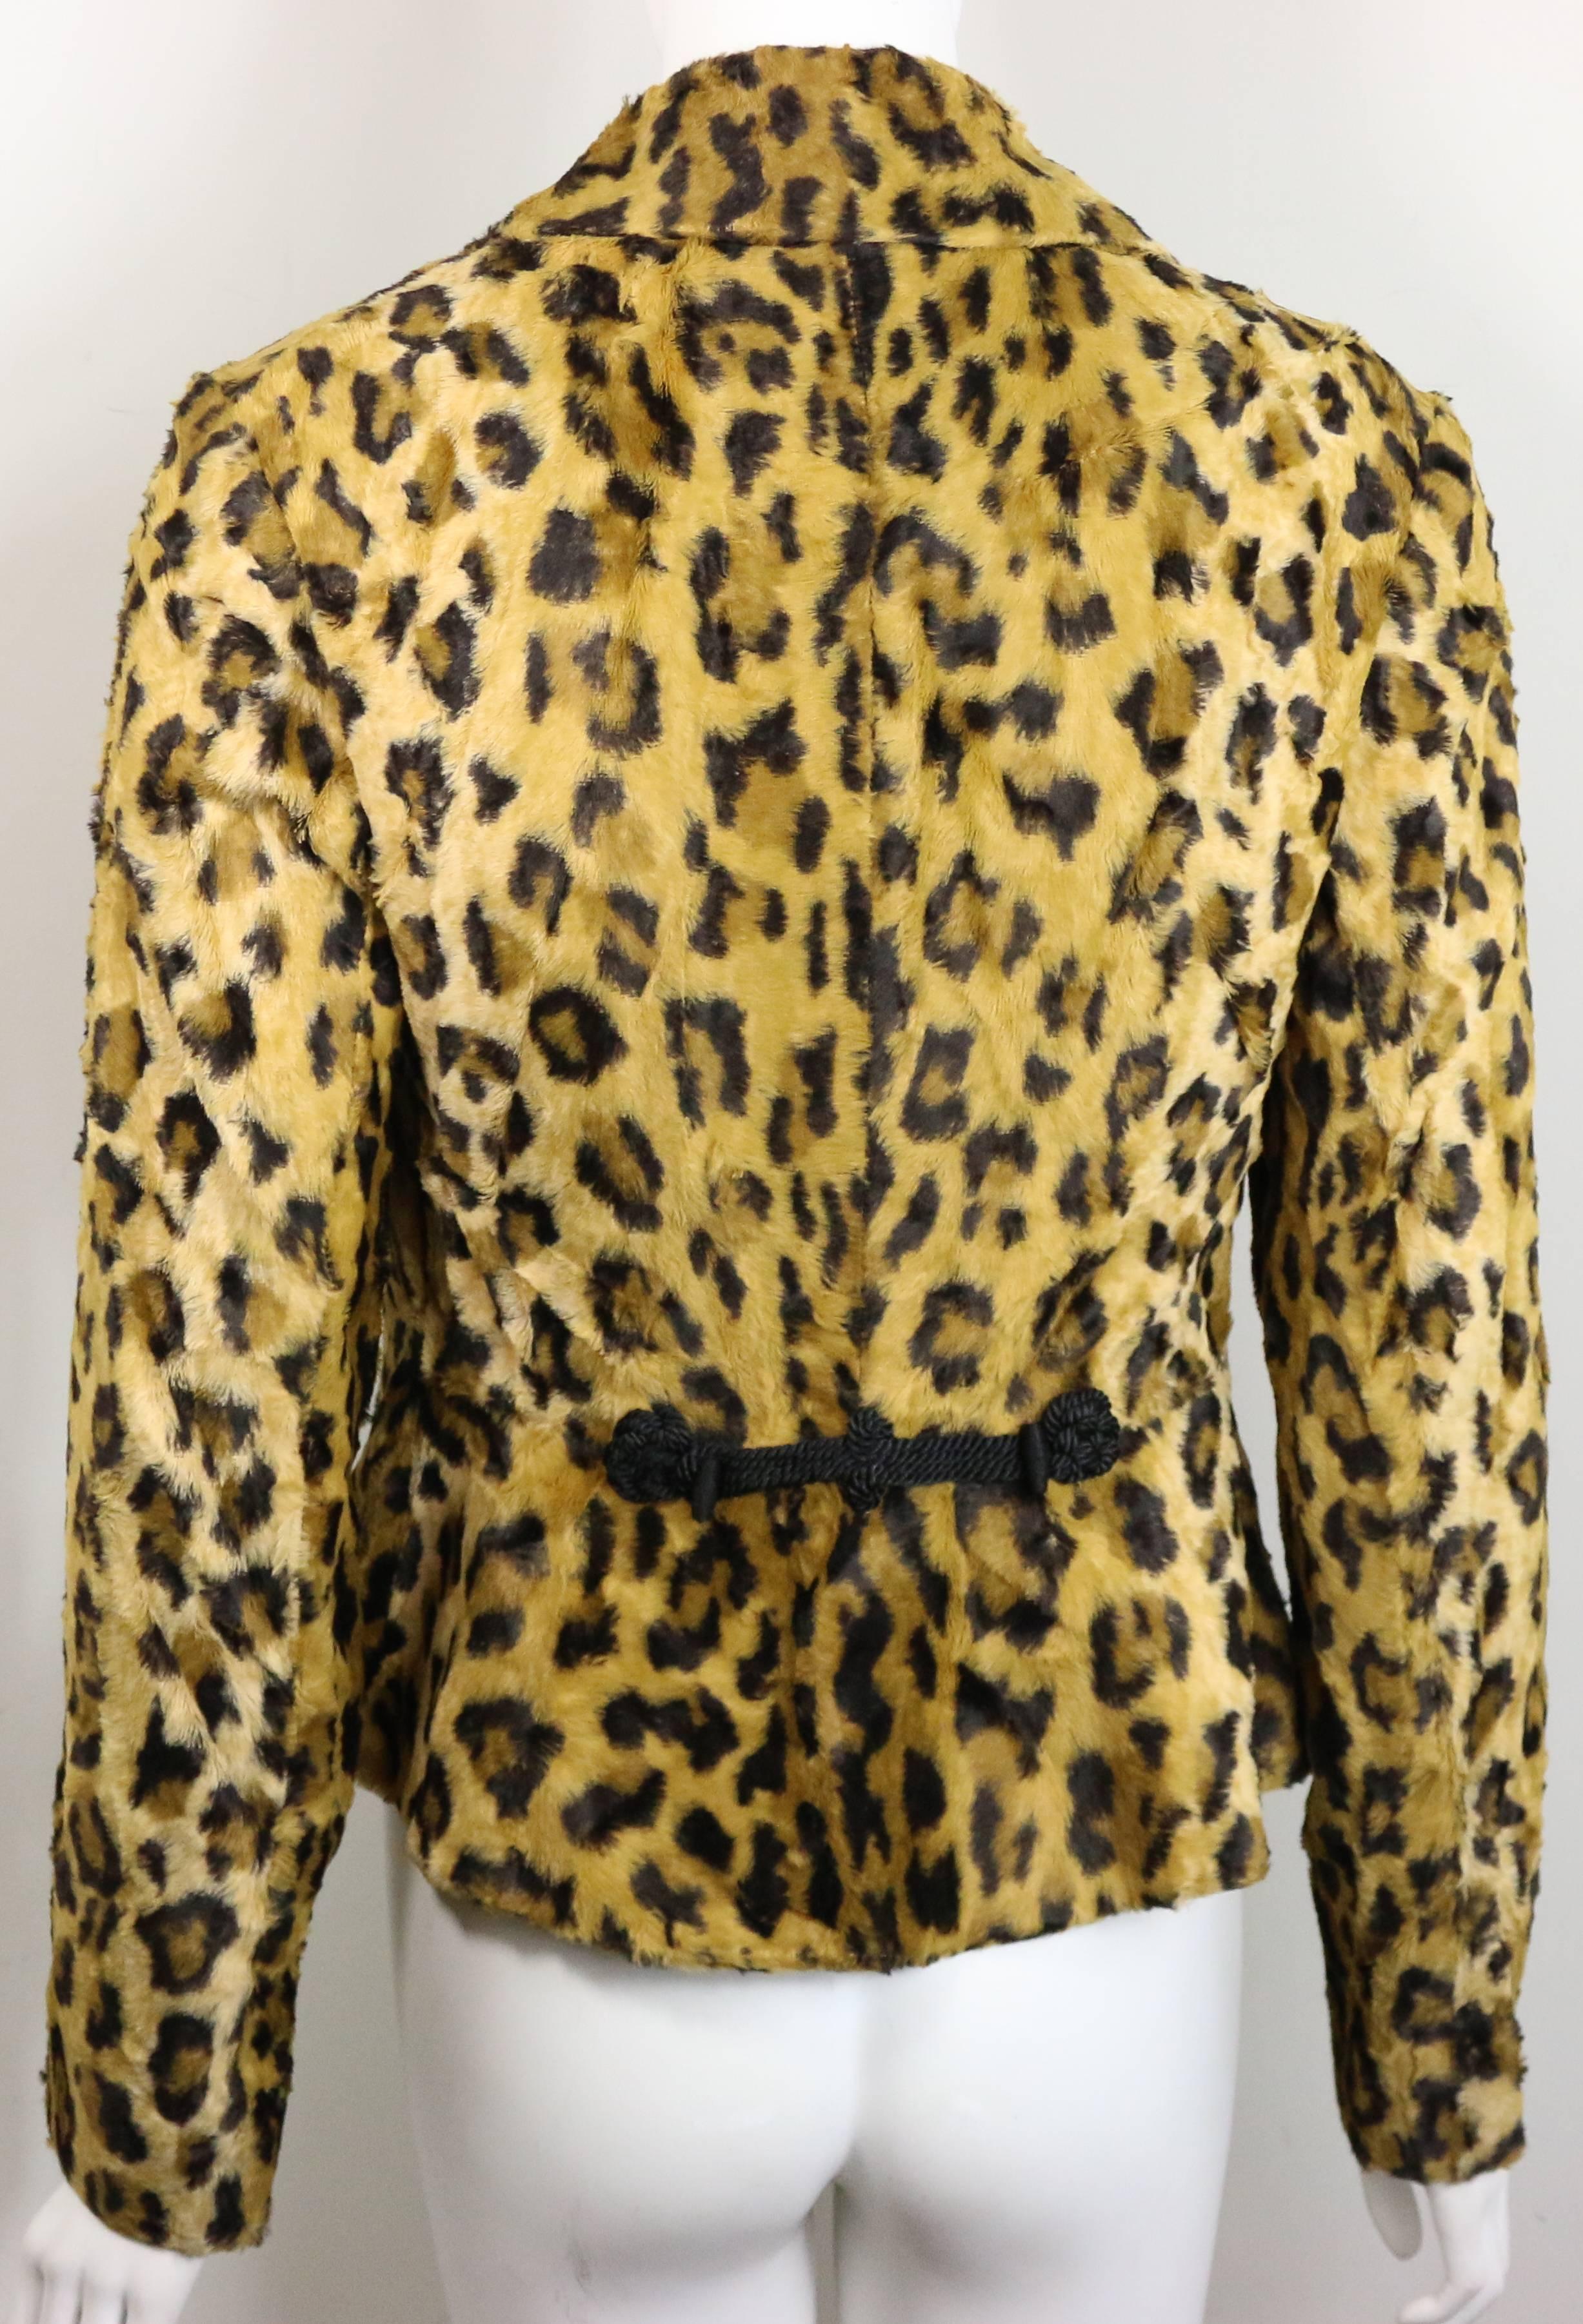 - Vintage 90s Blumarine by Anna Molinari fax fur leopard jacket. Featuring three copper buttons fastening and a tassel like decoration at the back of the jacket made this jacket unique! Also, animal print will never go out of style!!!  

- Made in